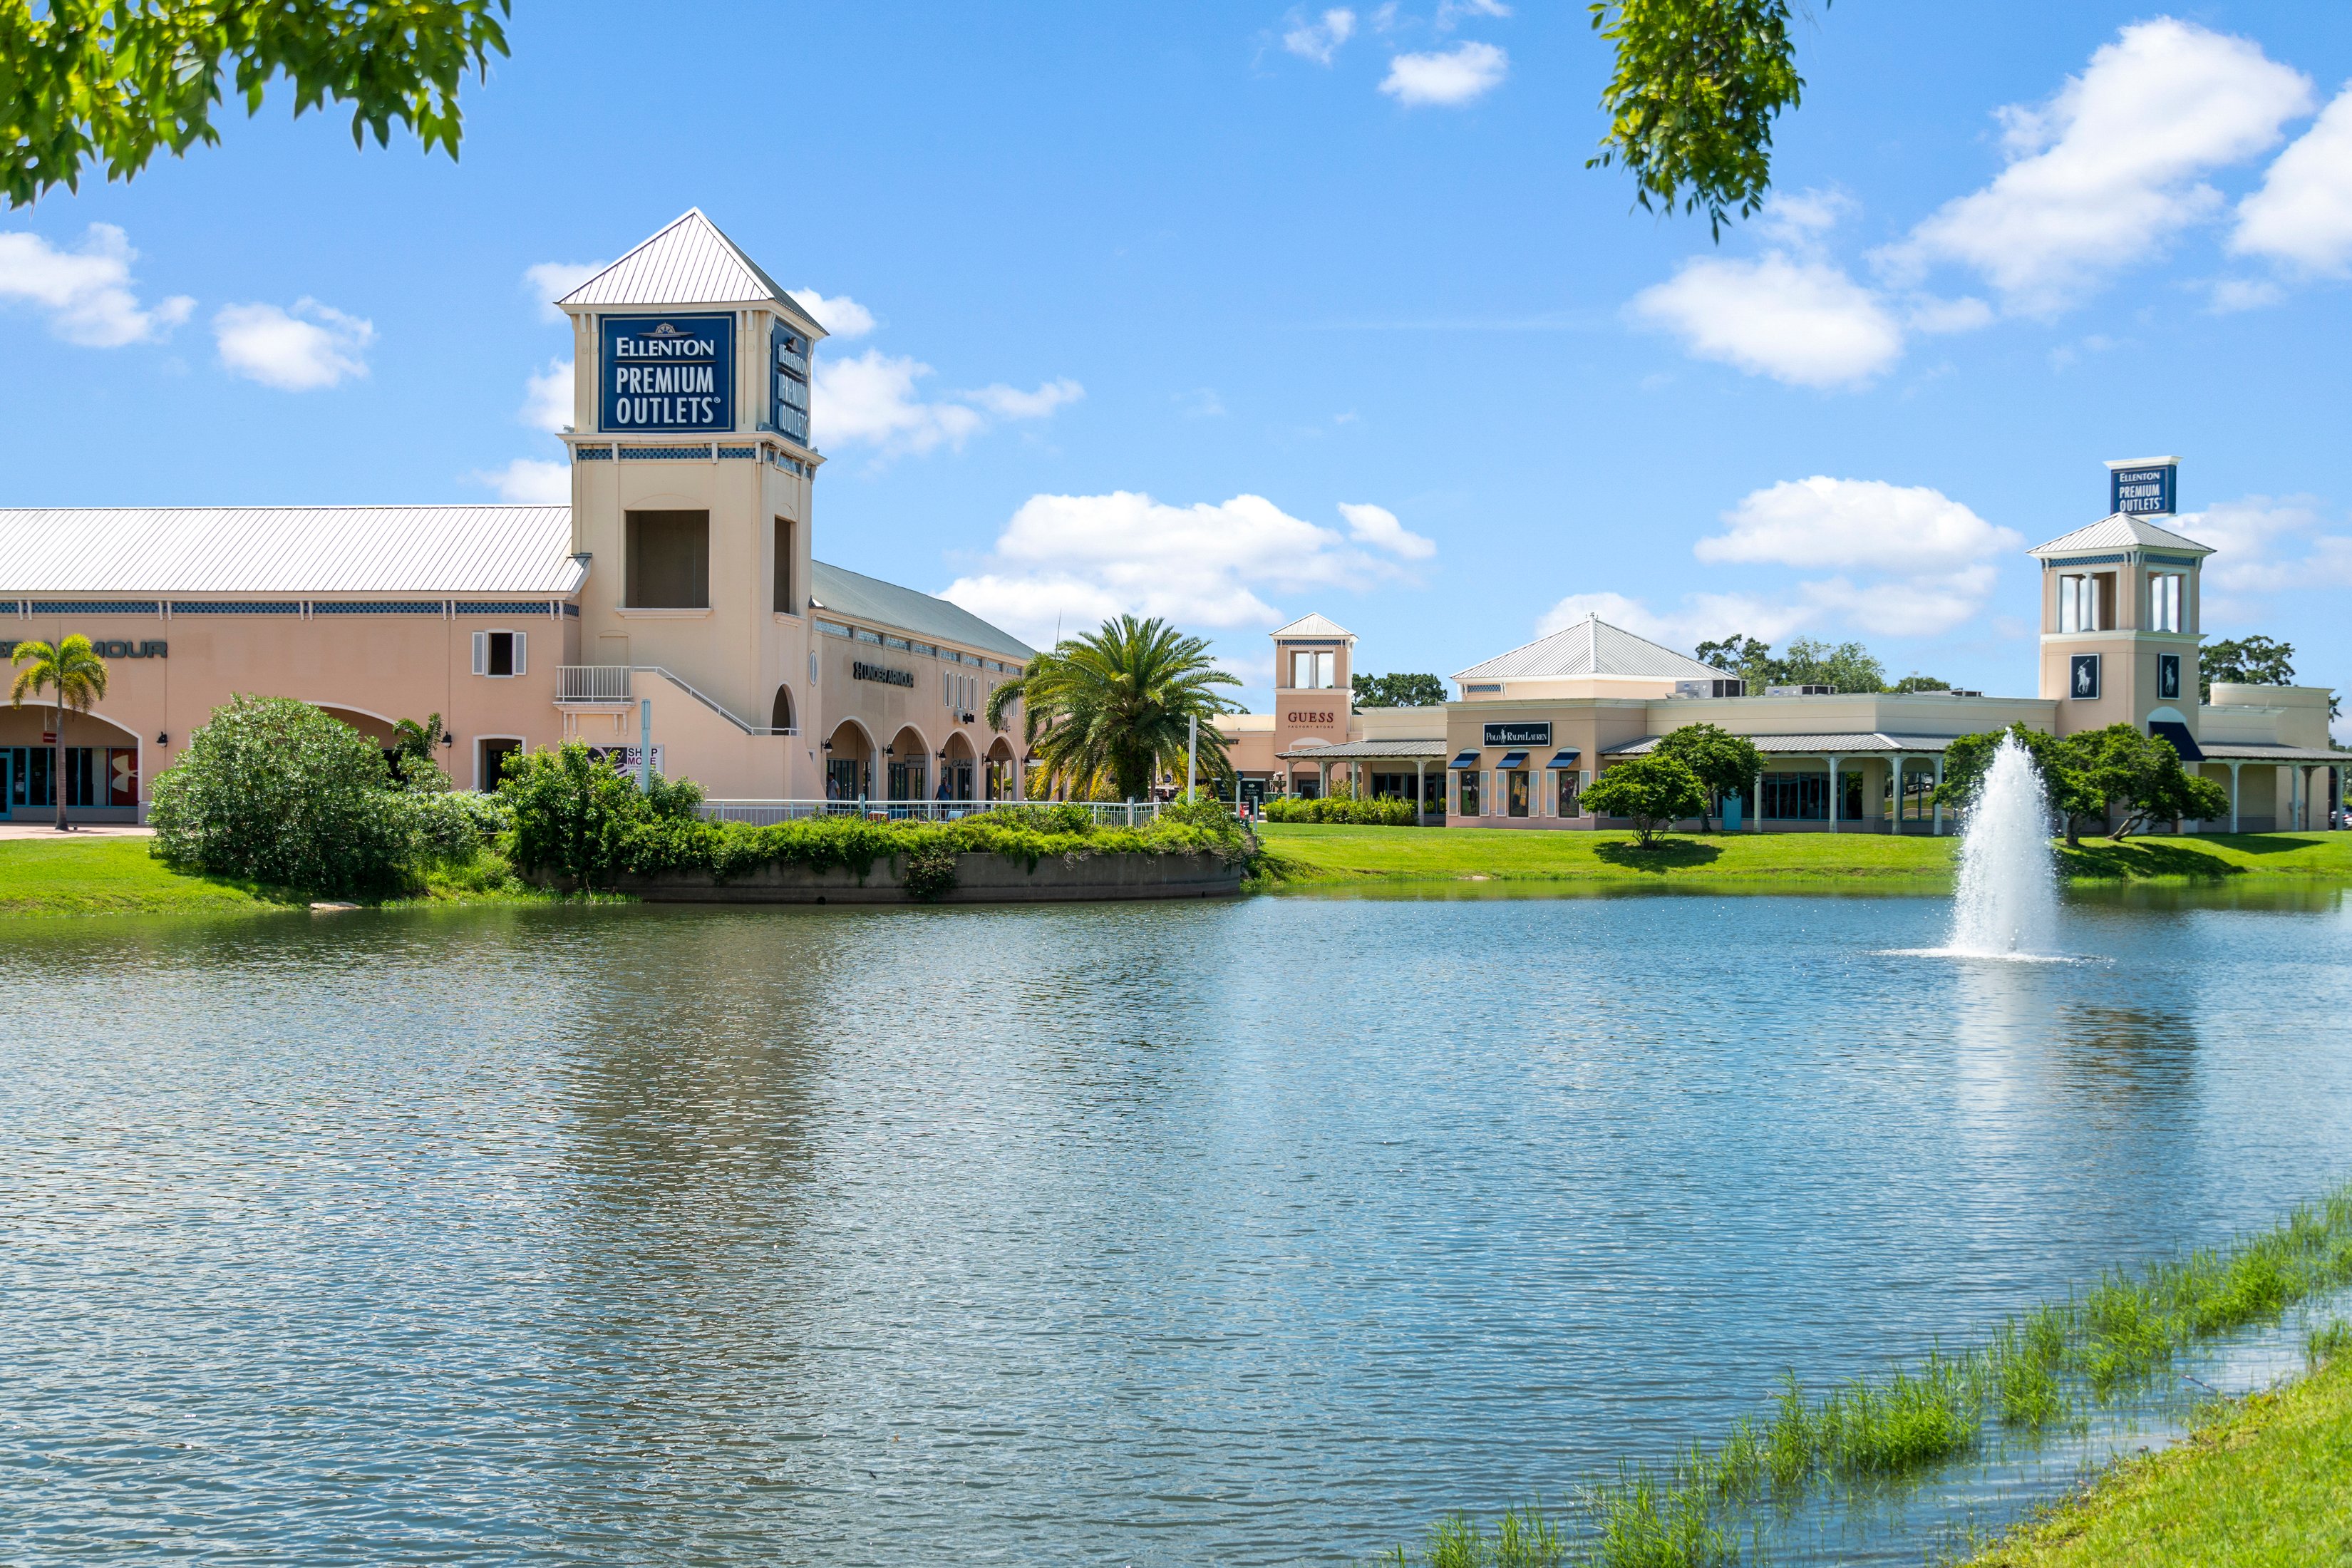 Close to Ellenton Premium Outlets® for shopping and dining